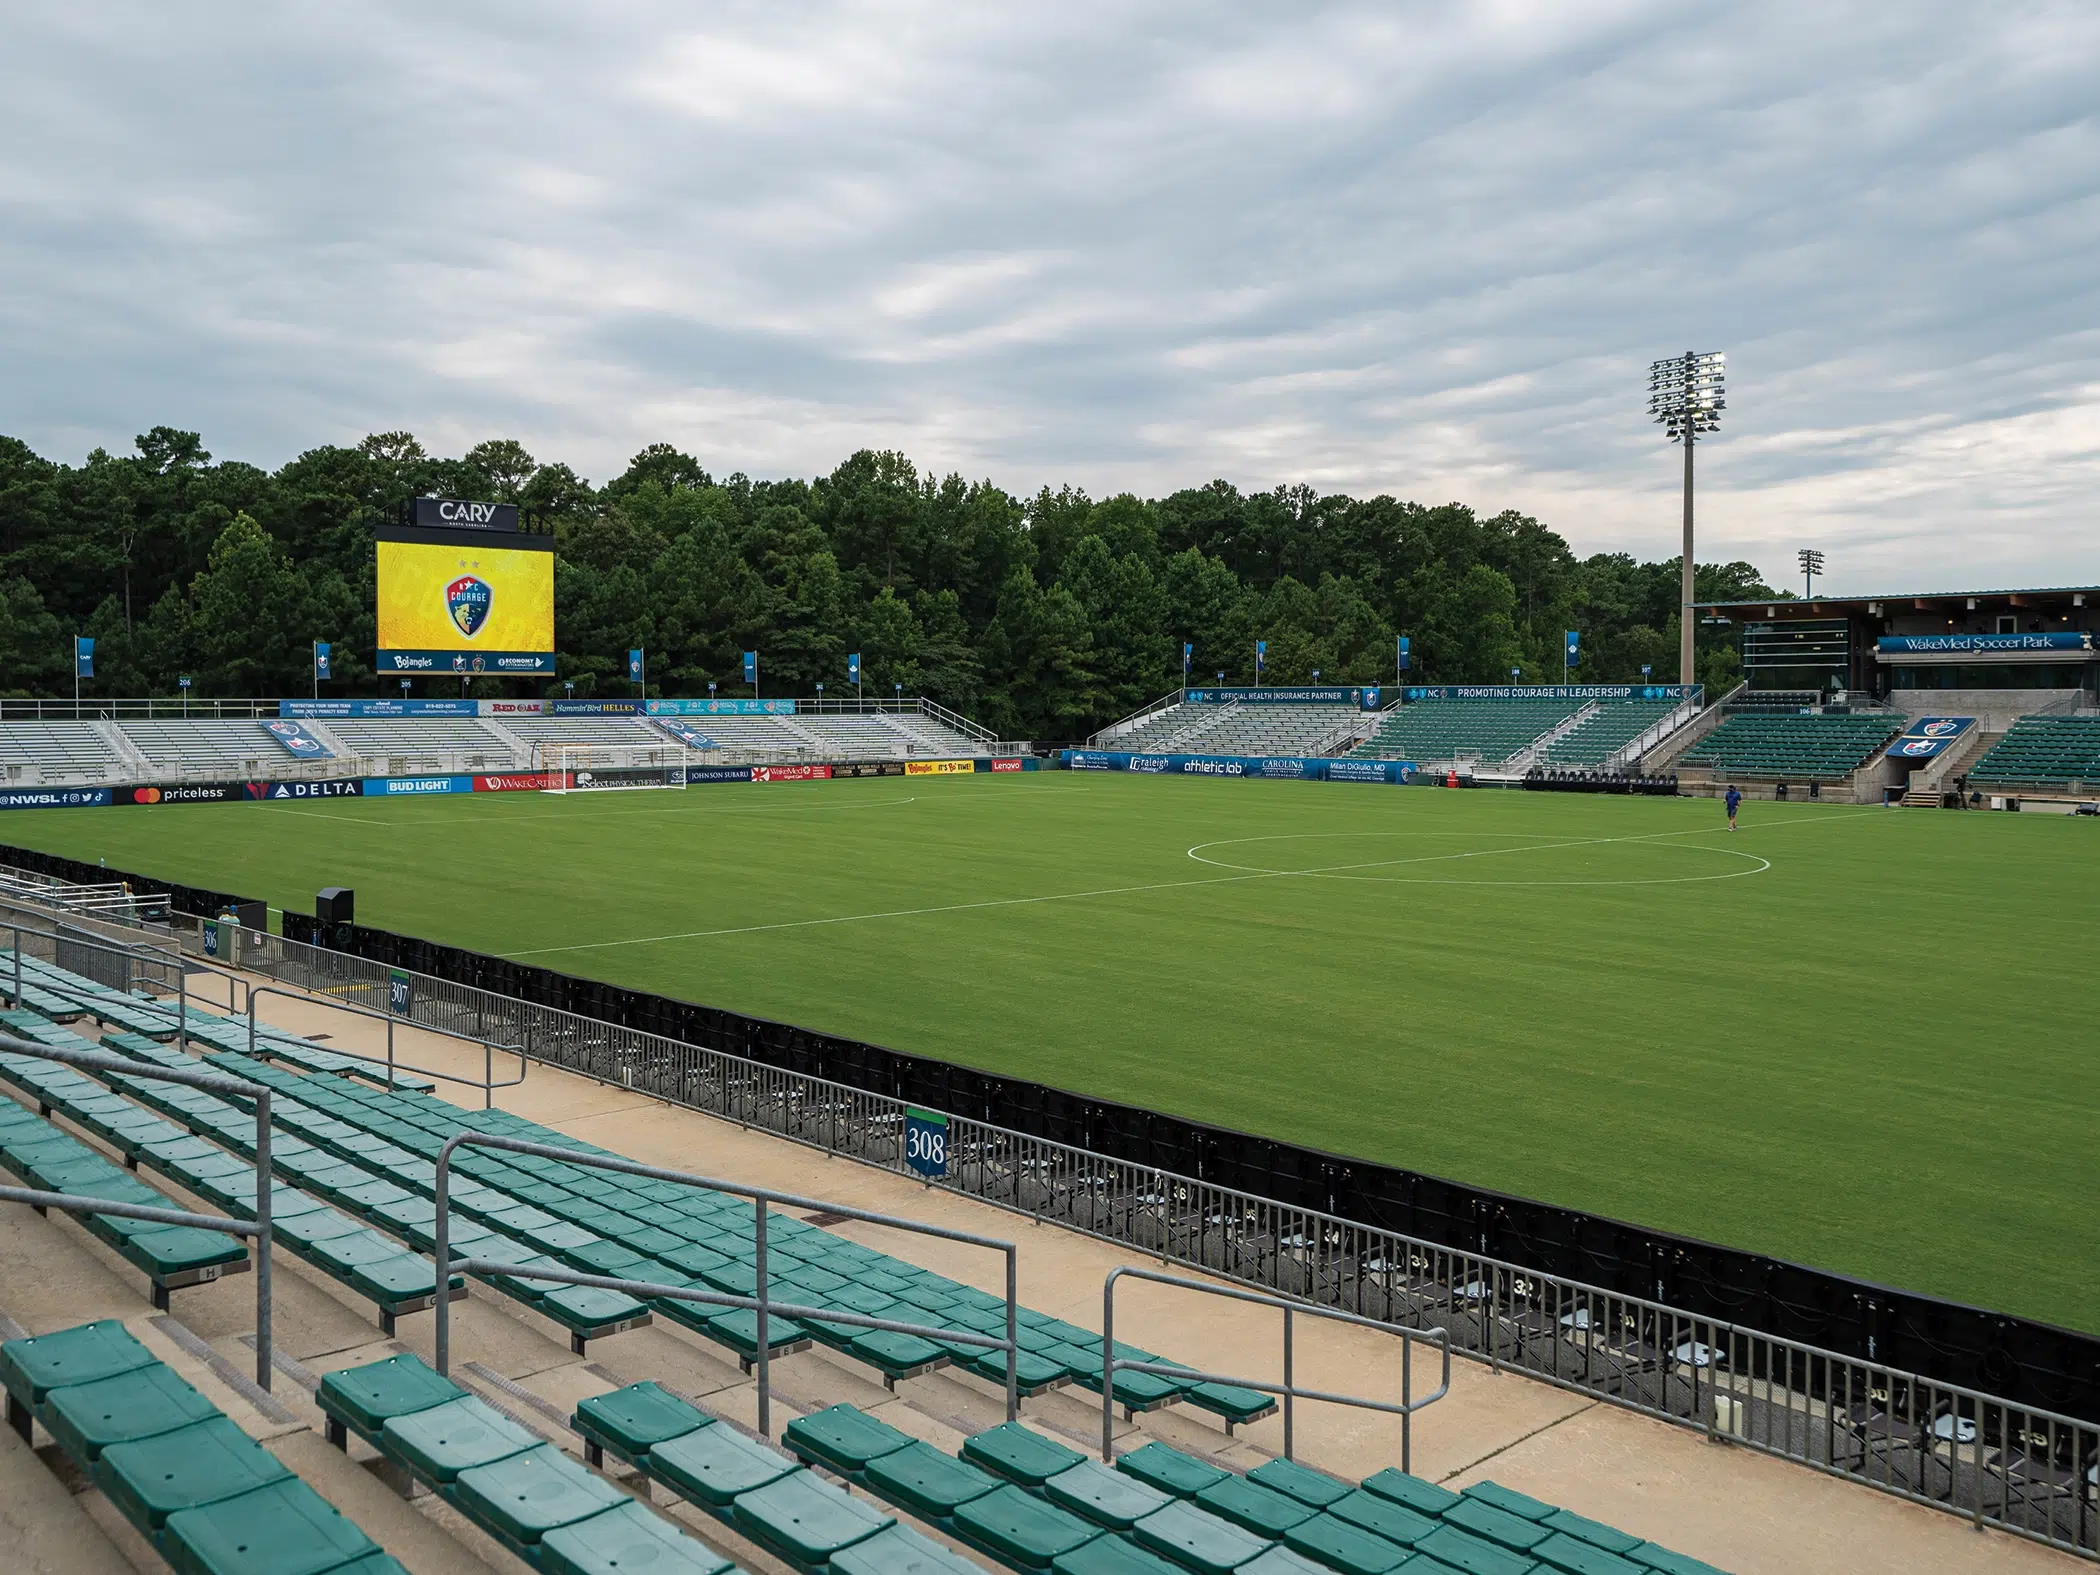 A photo of WakeMed Soccer Park with green bleachers, a video board showing the North Carolina crest, and green, lush trees behind.